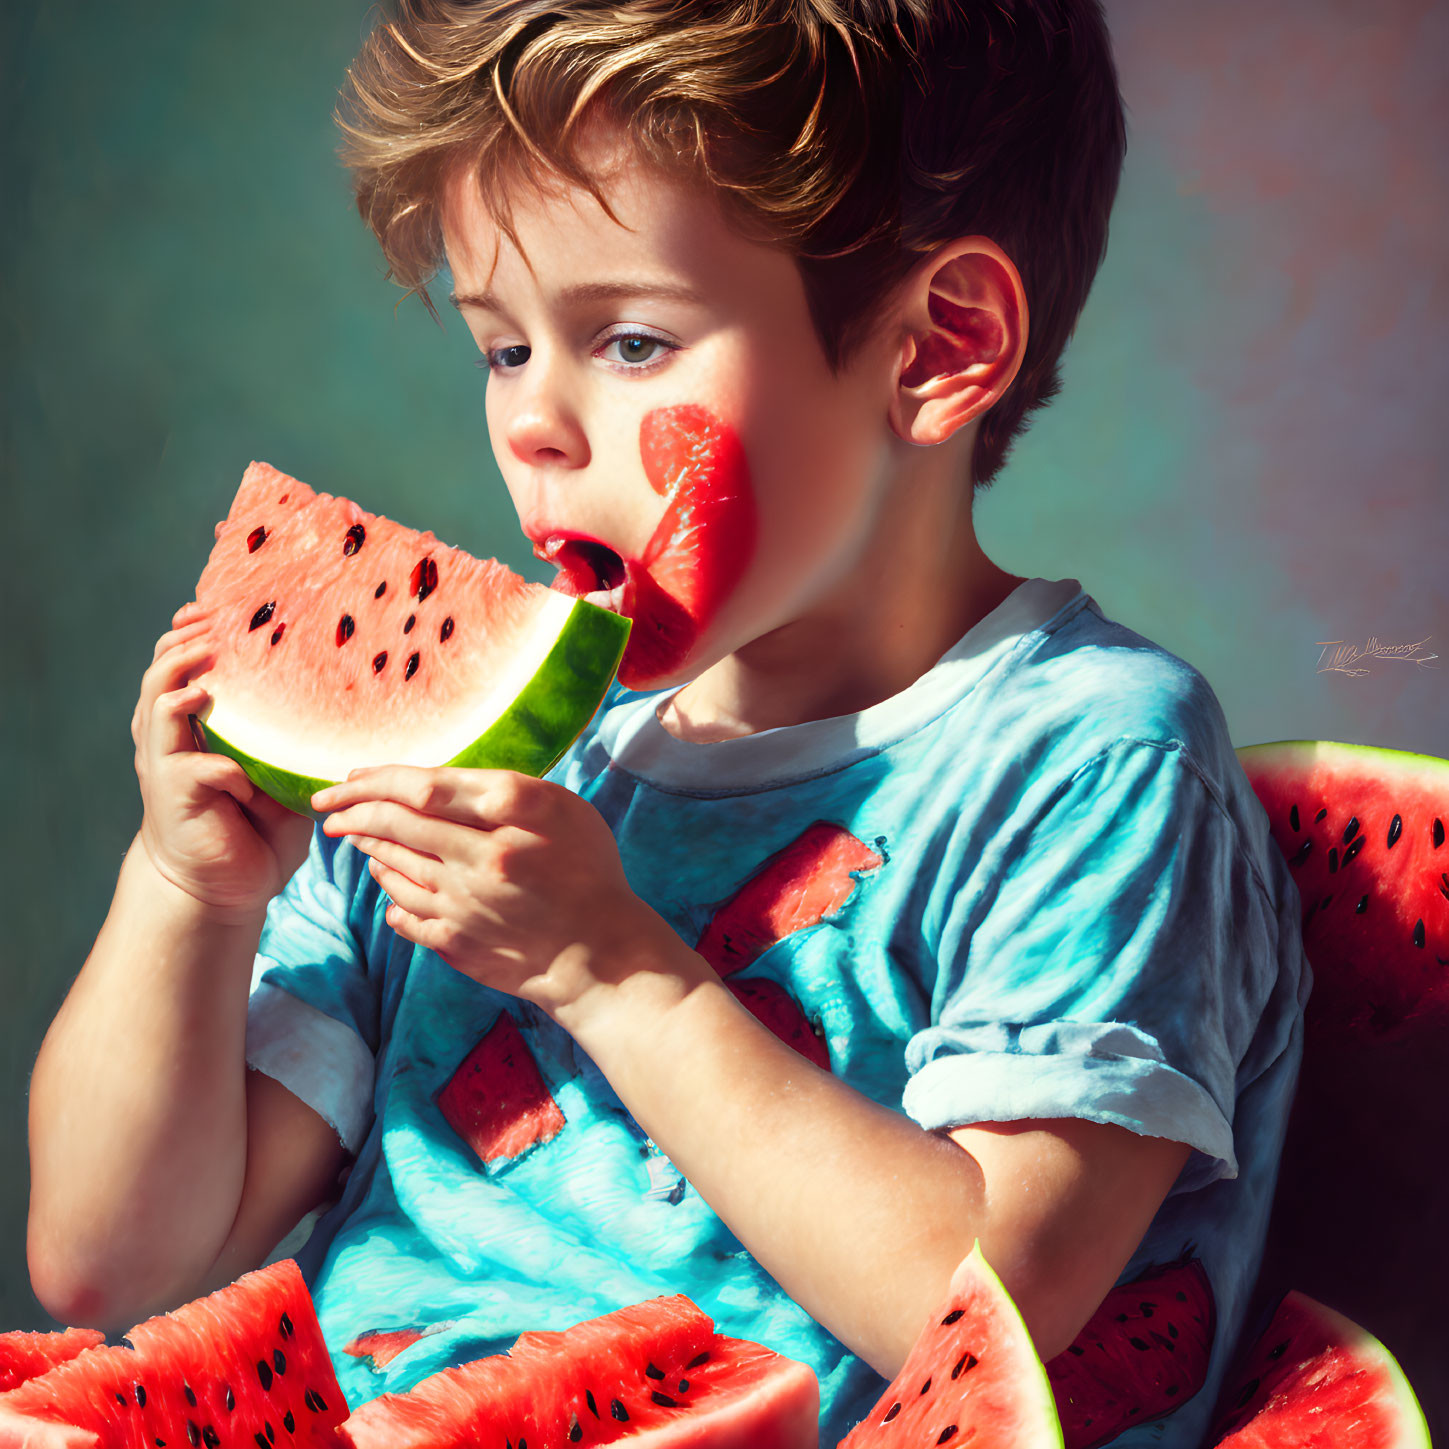 Child in blue t-shirt eating watermelon slice with messy hair